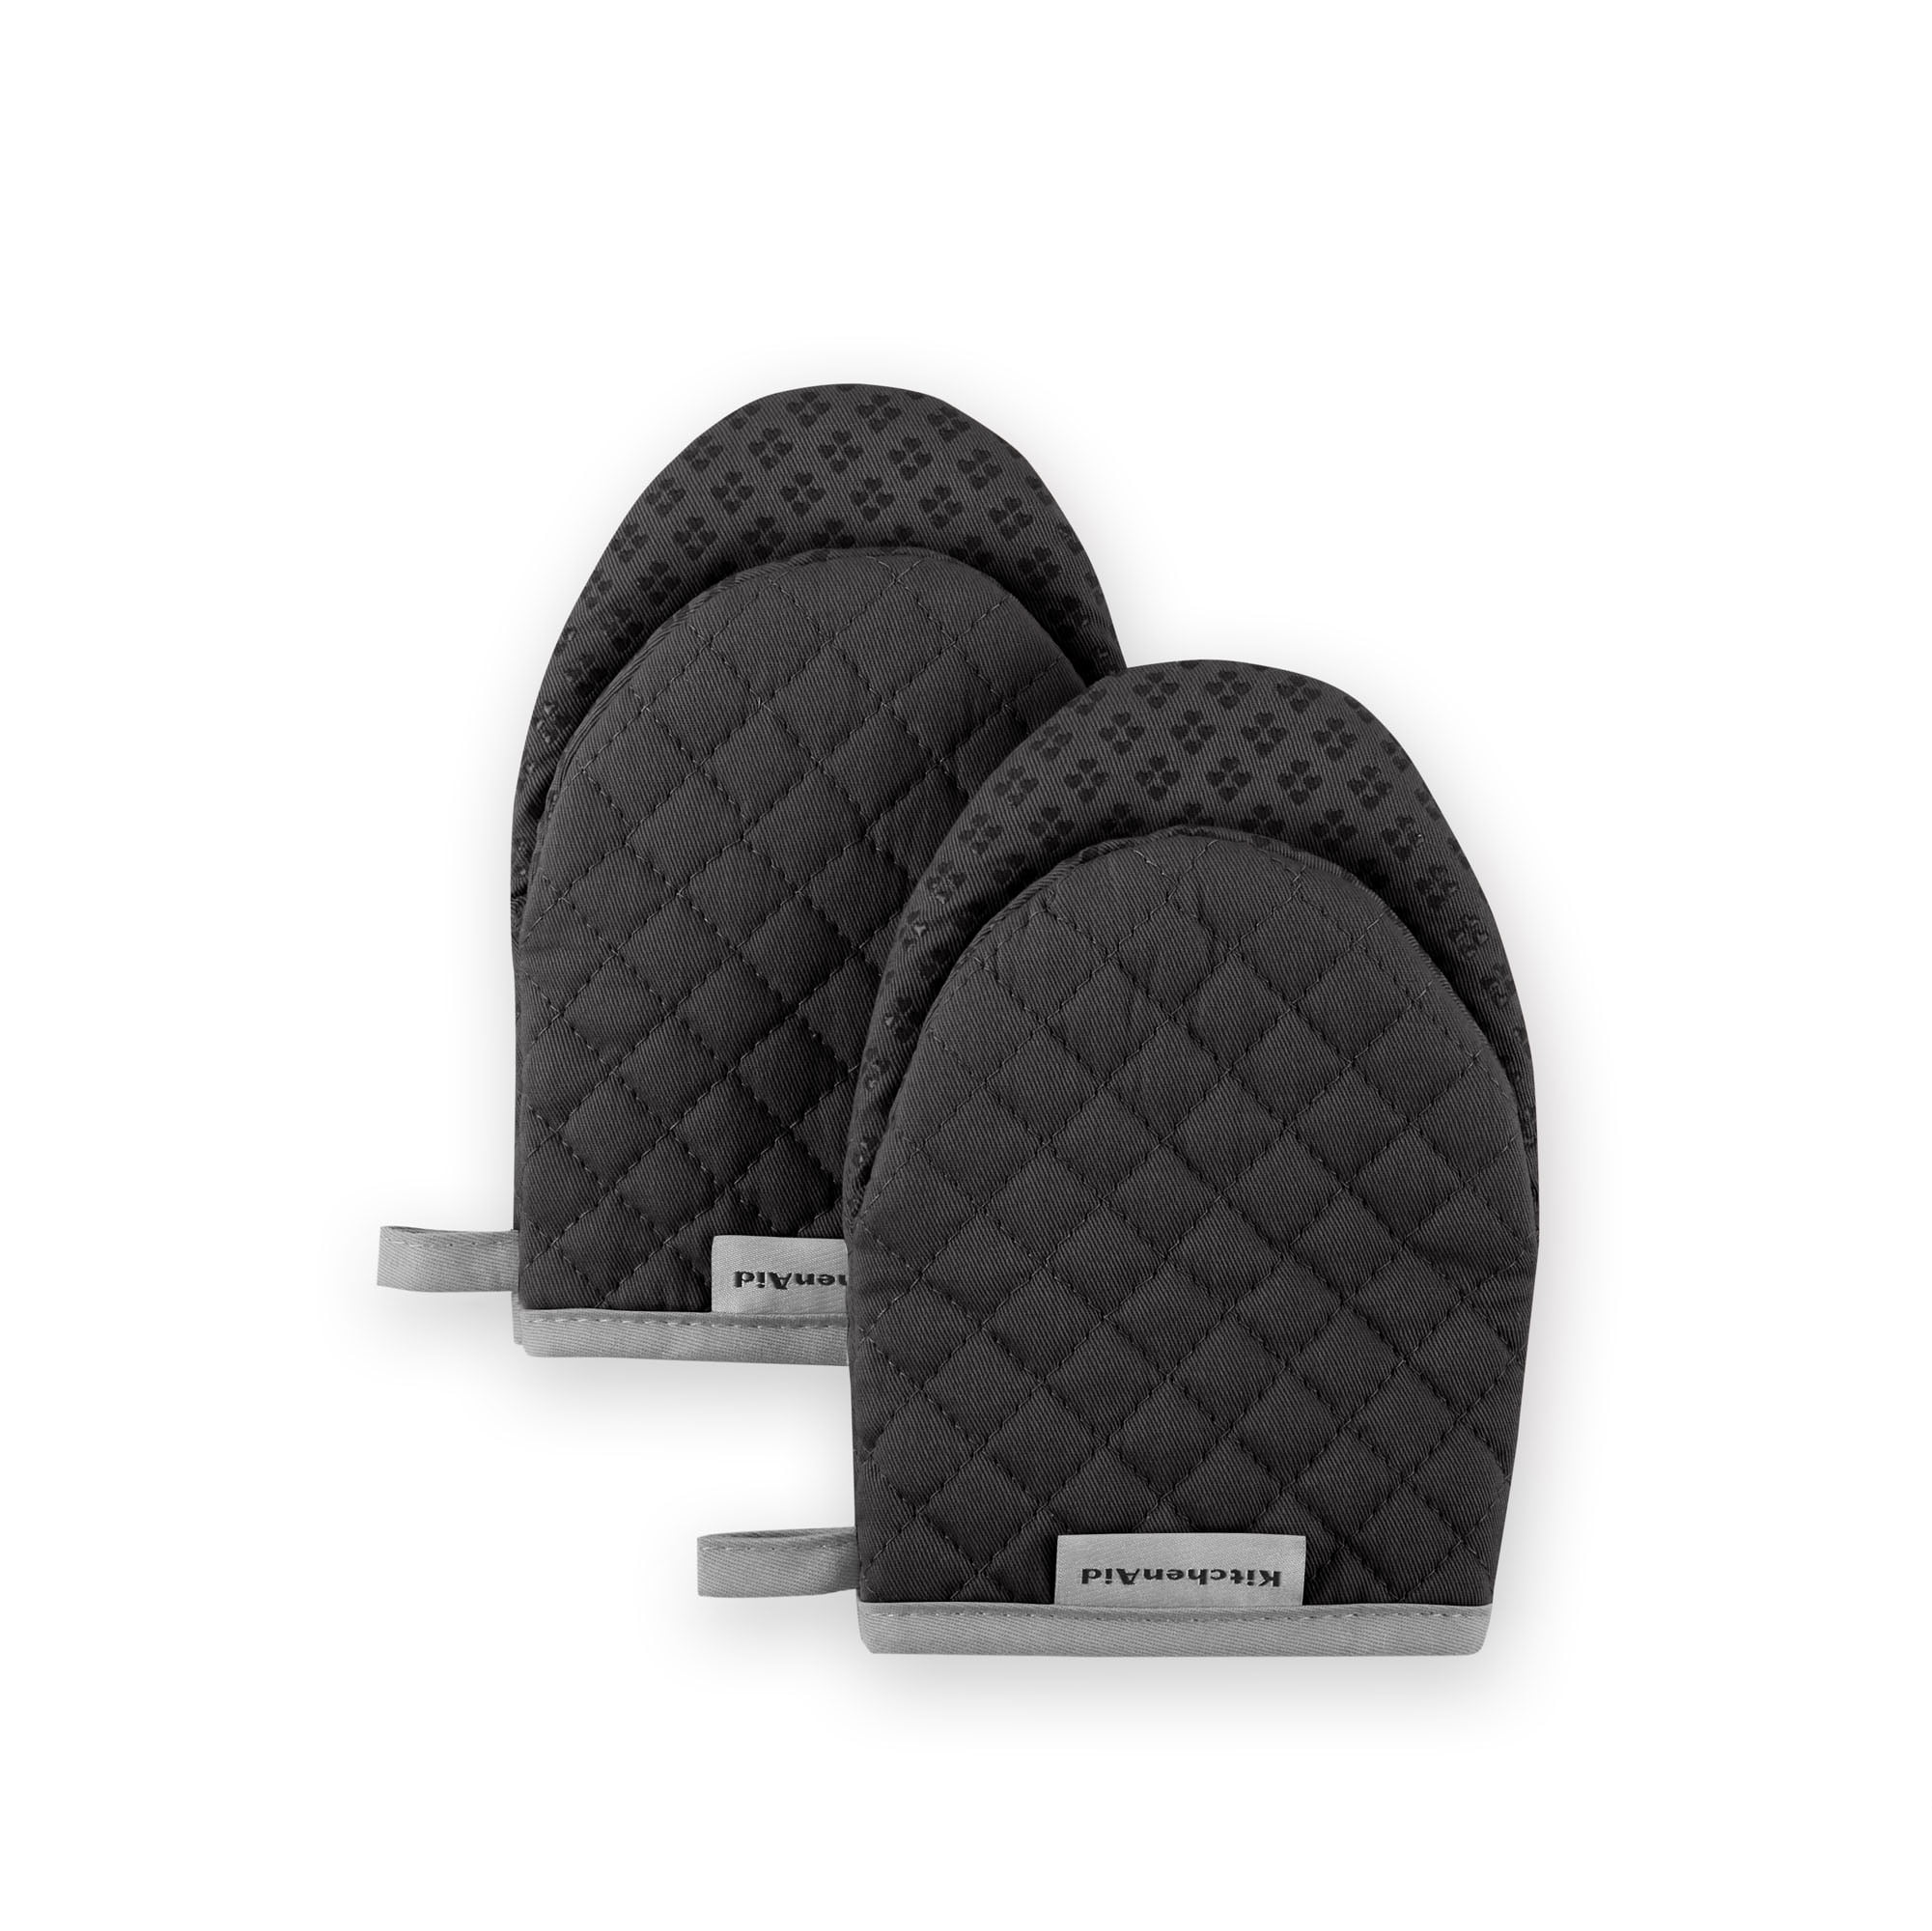 KitchenAid Asteroid Cotton Oven Mitts with Silicone Grip Charcoal Grey Set of 2 